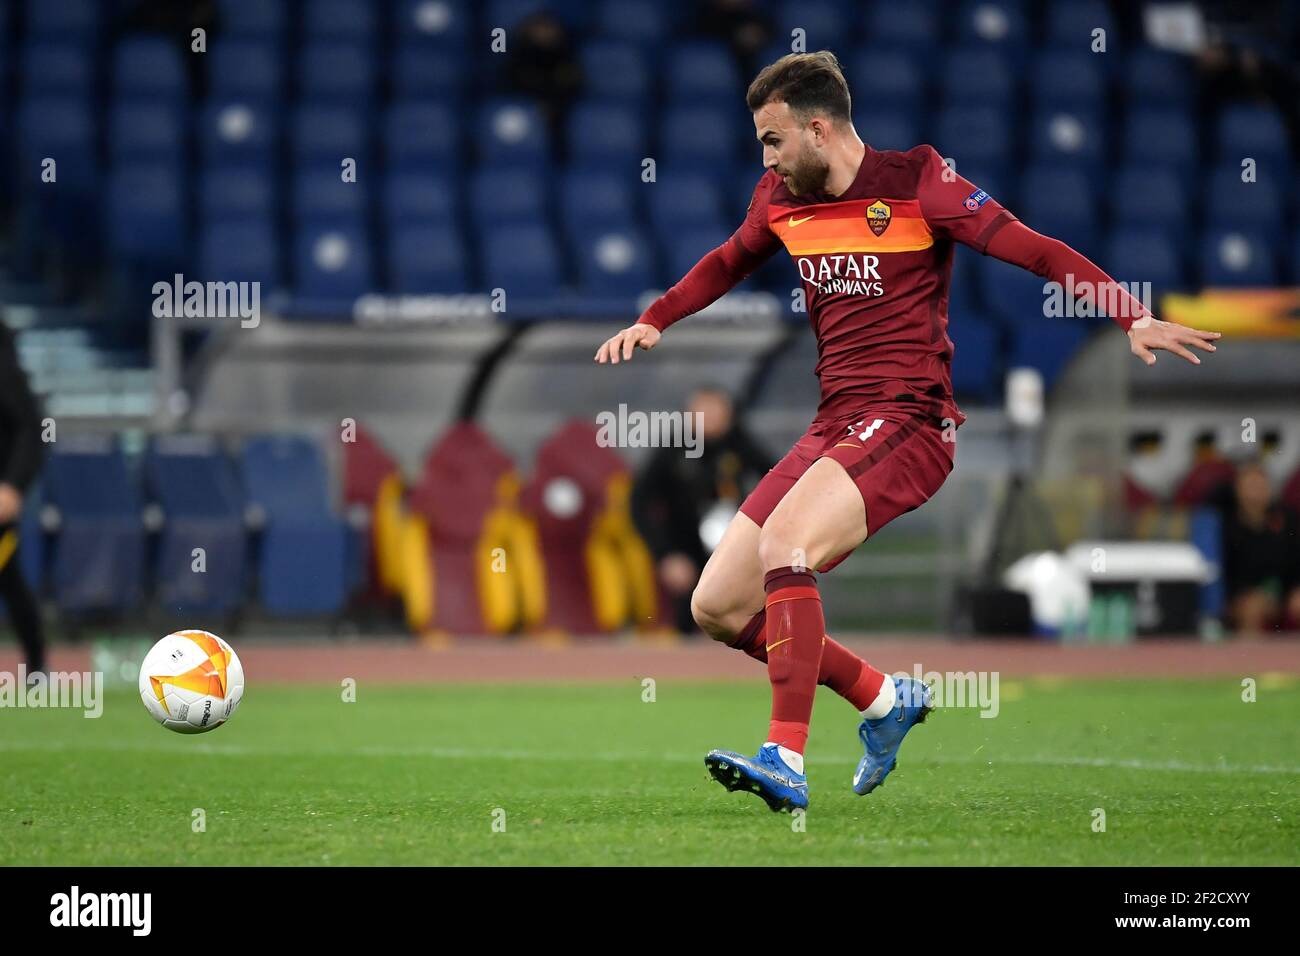 Rome, Italy. 11th Mar, 2021. Borja Mayoral of AS Roma in action during the Europa League round of 16 football match between AS Roma and FC Shakhtar Donetsk at Stadio Olimpico in Rome (Italy), March, 11th, 2021. Photo Antonietta Baldassarre/Insidefoto Credit: insidefoto srl/Alamy Live News Stock Photo